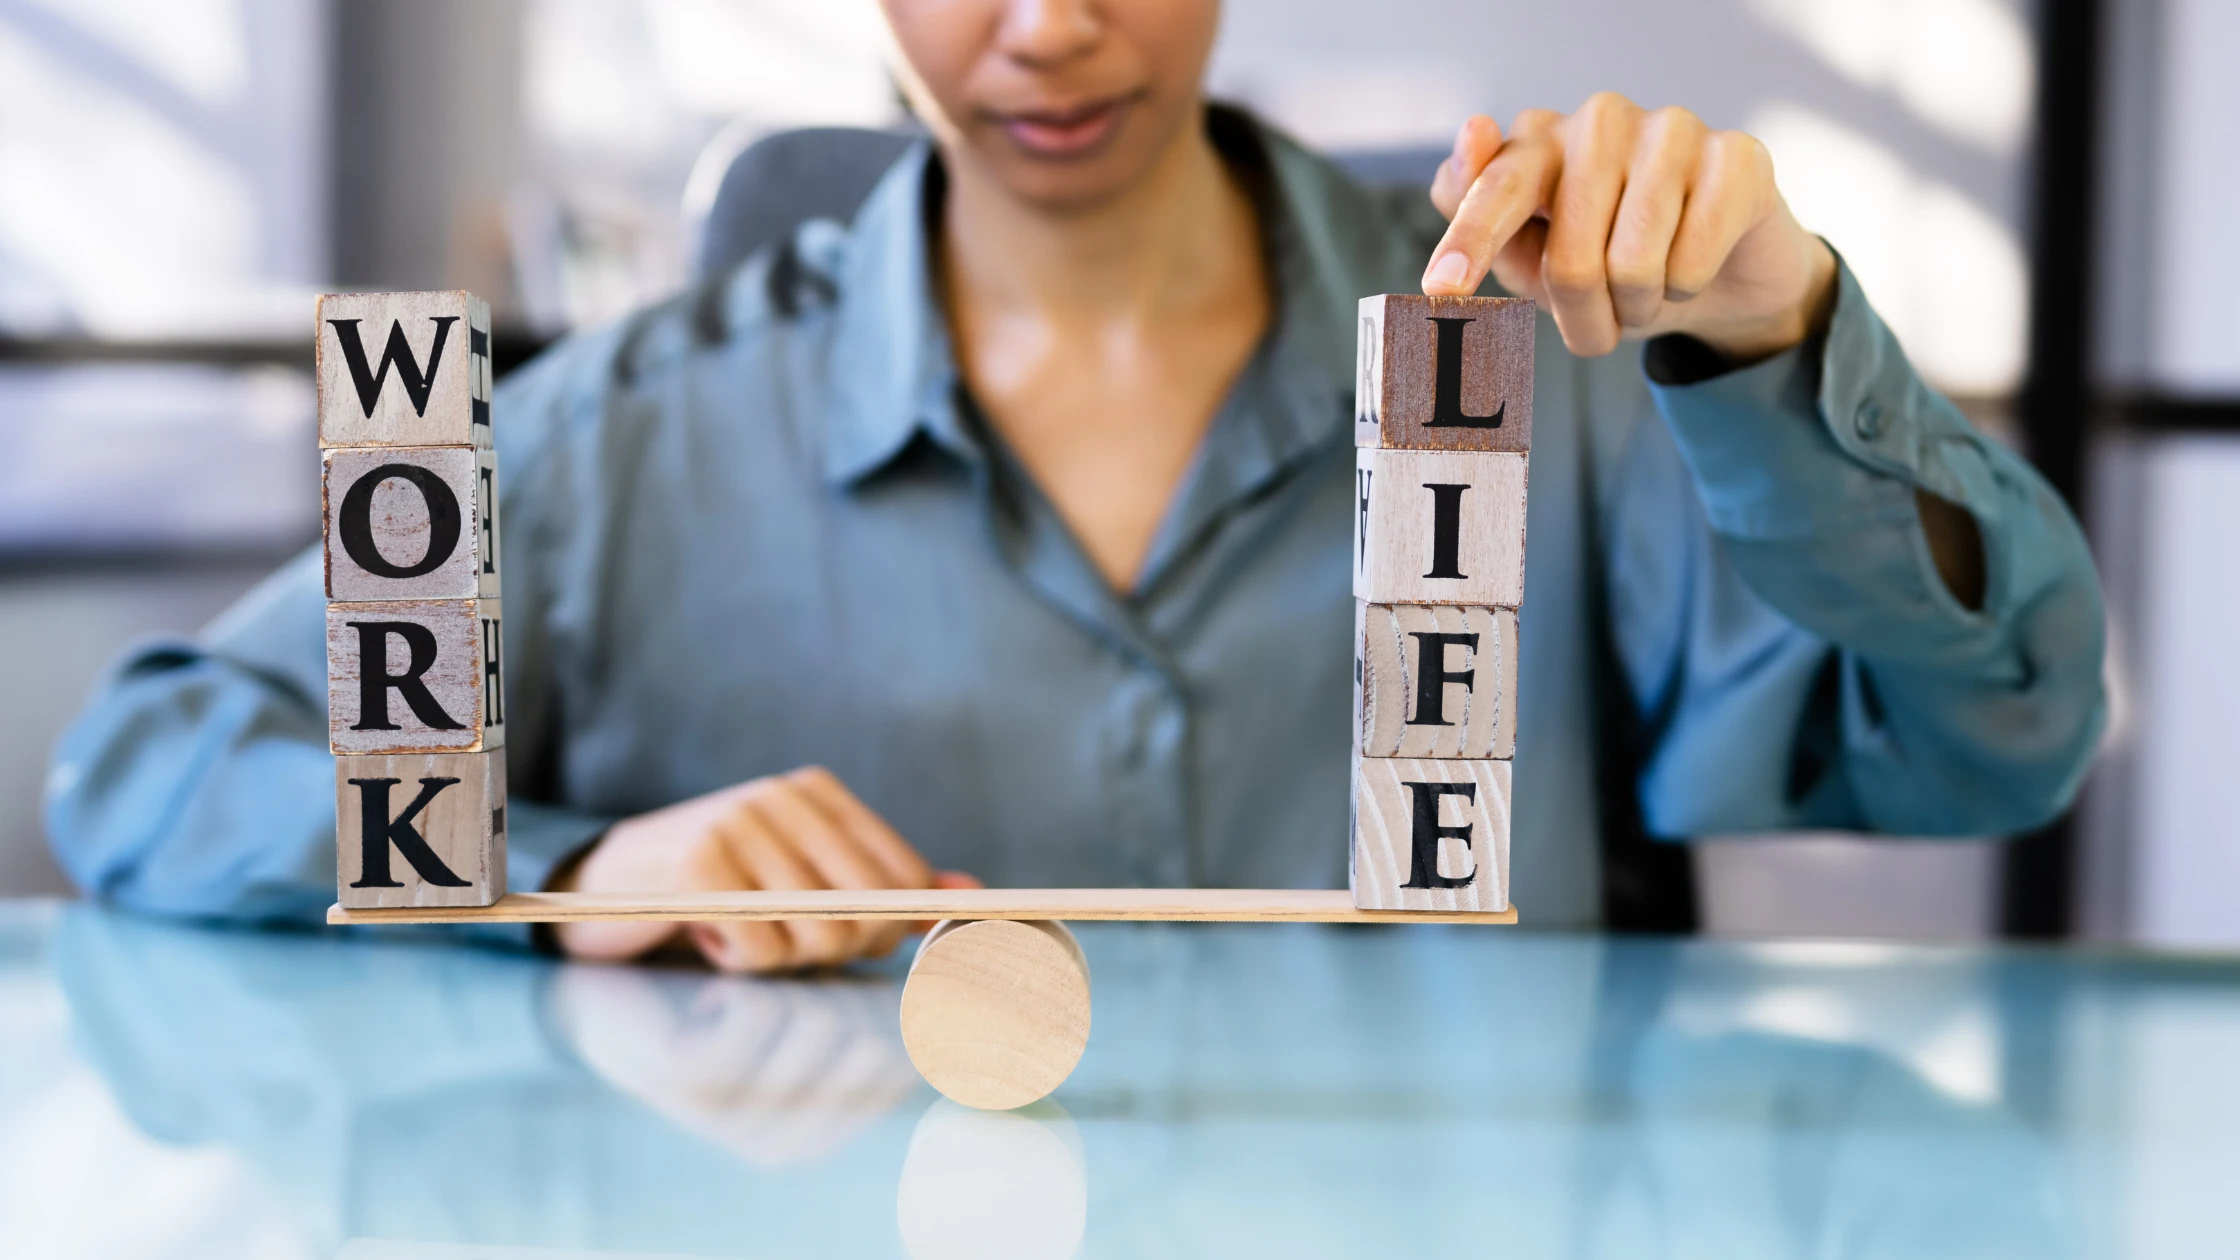 Person balancing wooden blocks with the words 'WORK' and 'LIFE' on a seesaw, symbolizing work-life balance during USMLE prep.